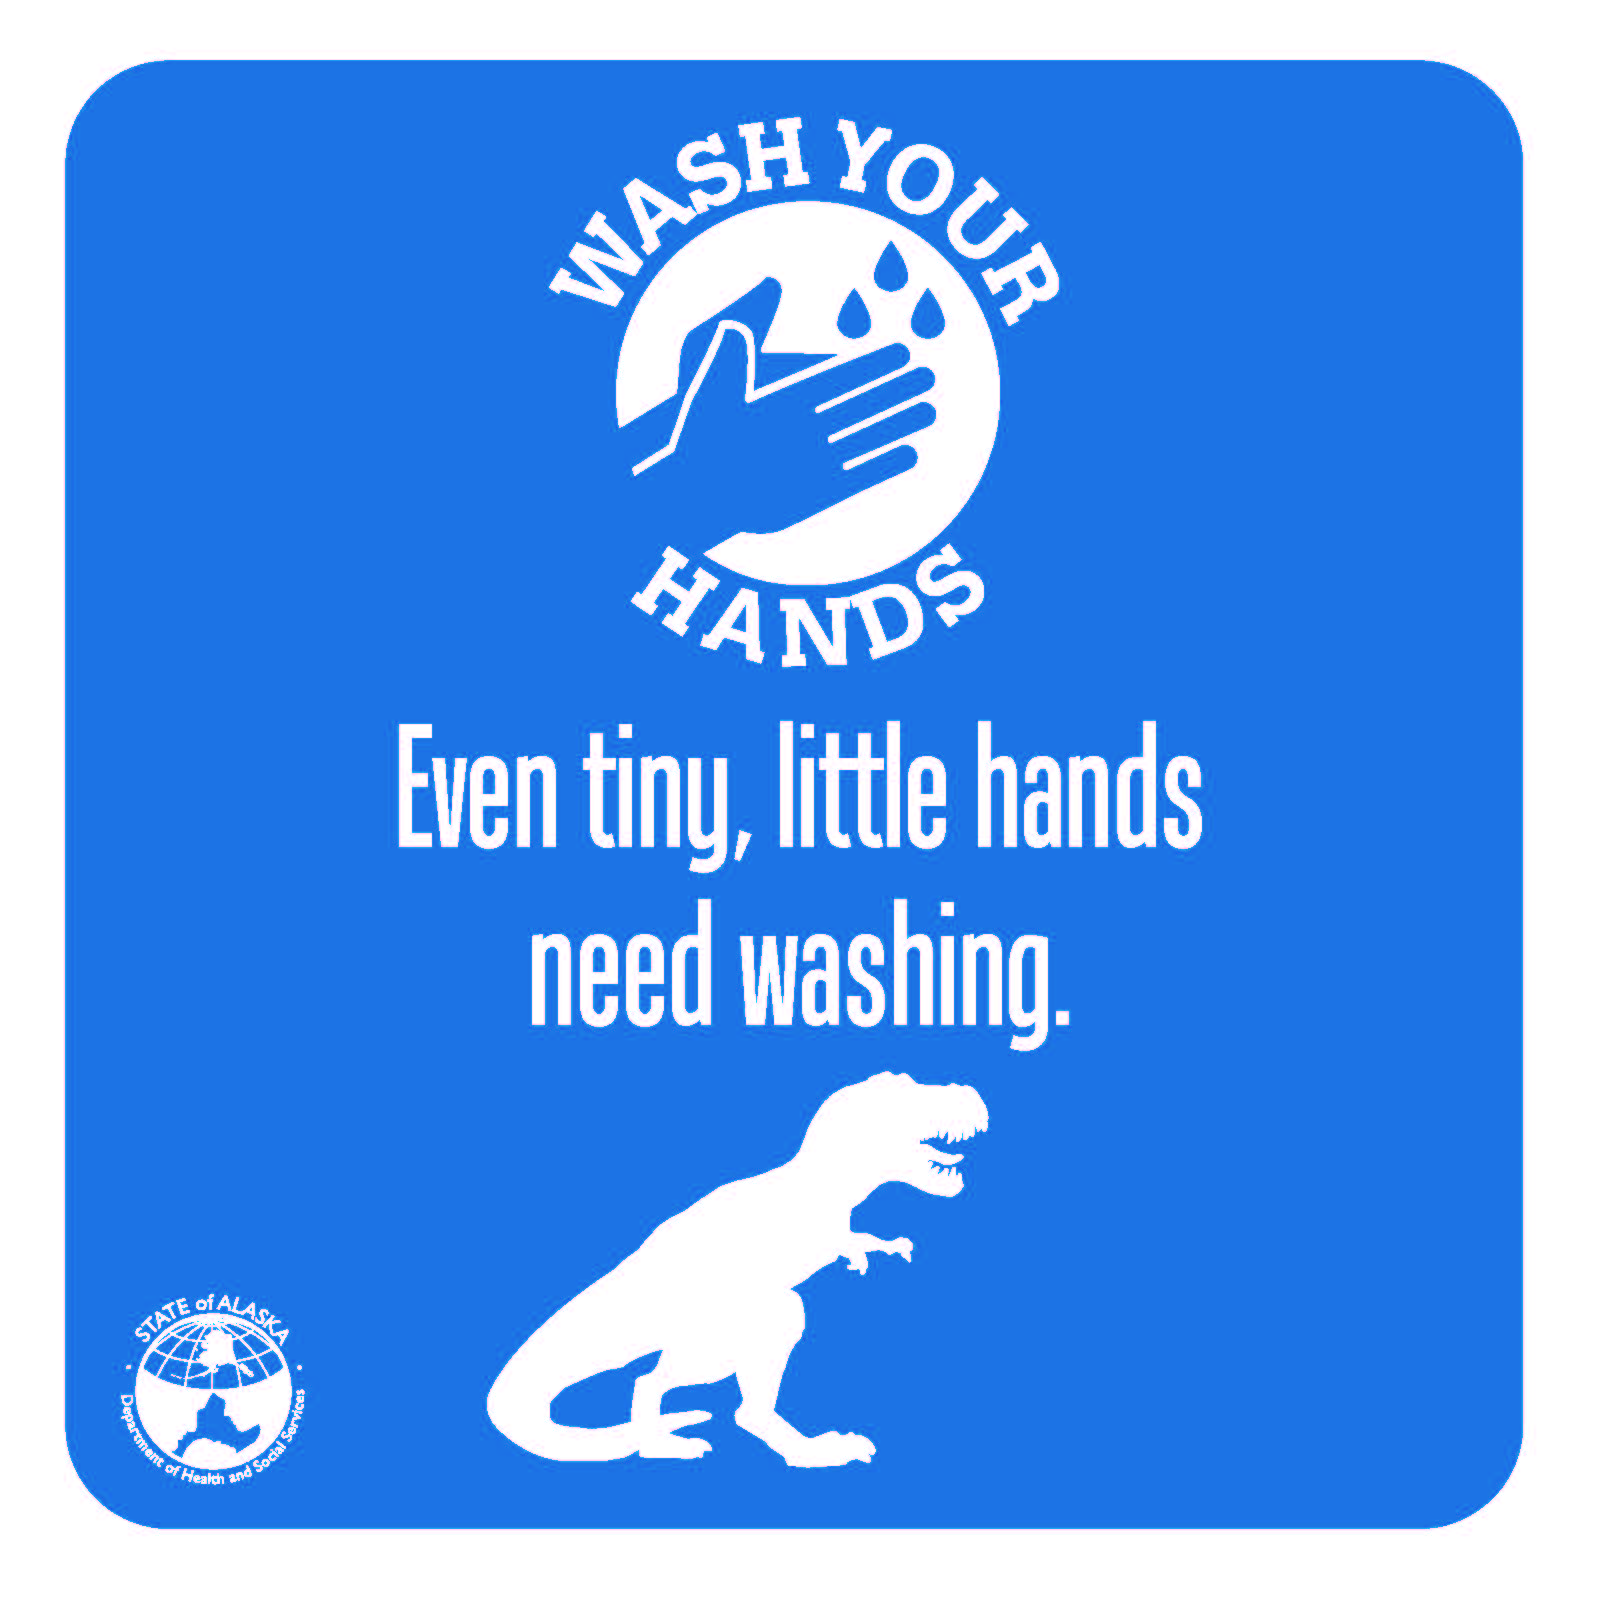 Wash your hands: Even tiny, little hands need washing.